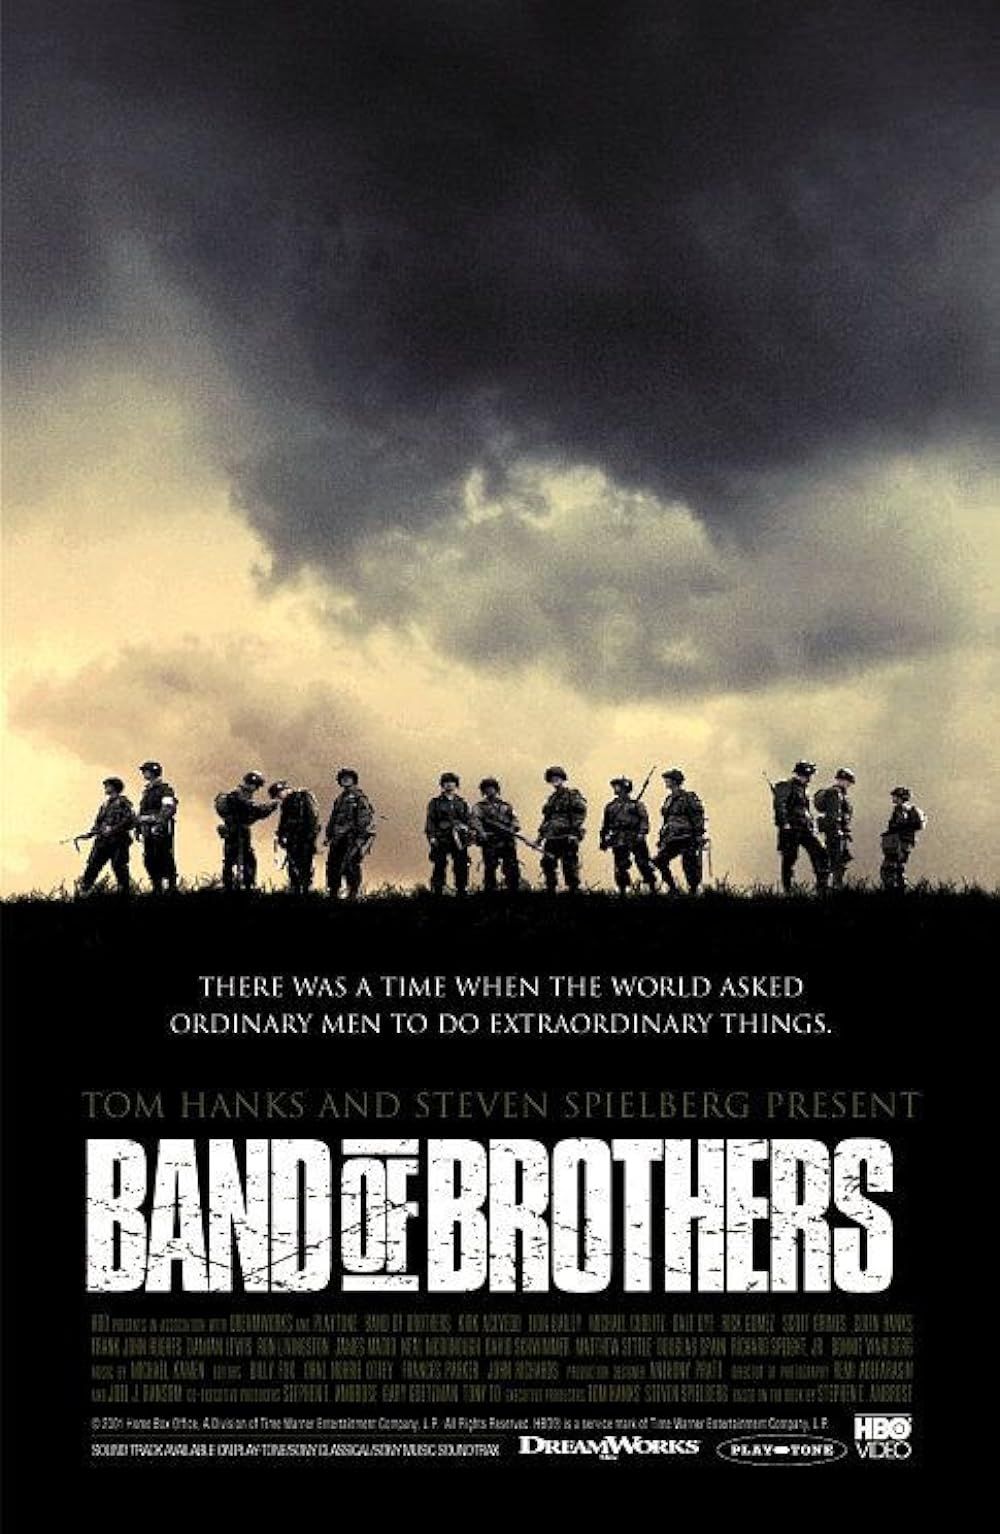 Why ‘Band of Brothers’ Is Still Harrowing After All These Years